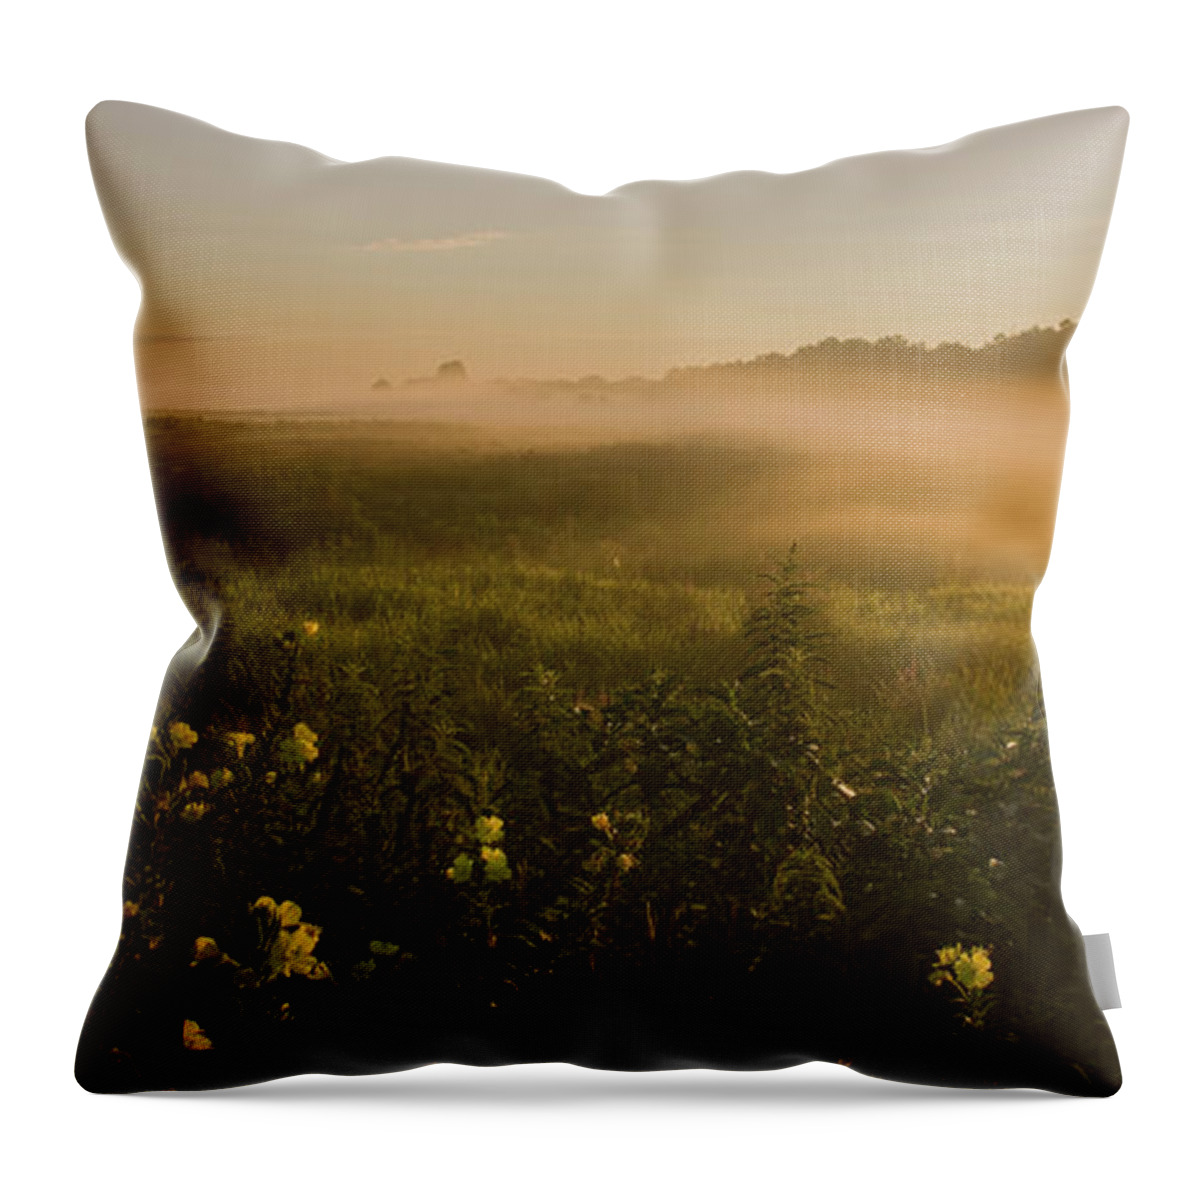 Sunrise Throw Pillow featuring the photograph Golden Fog Sunrise At The Refuge by Angelo Marcialis